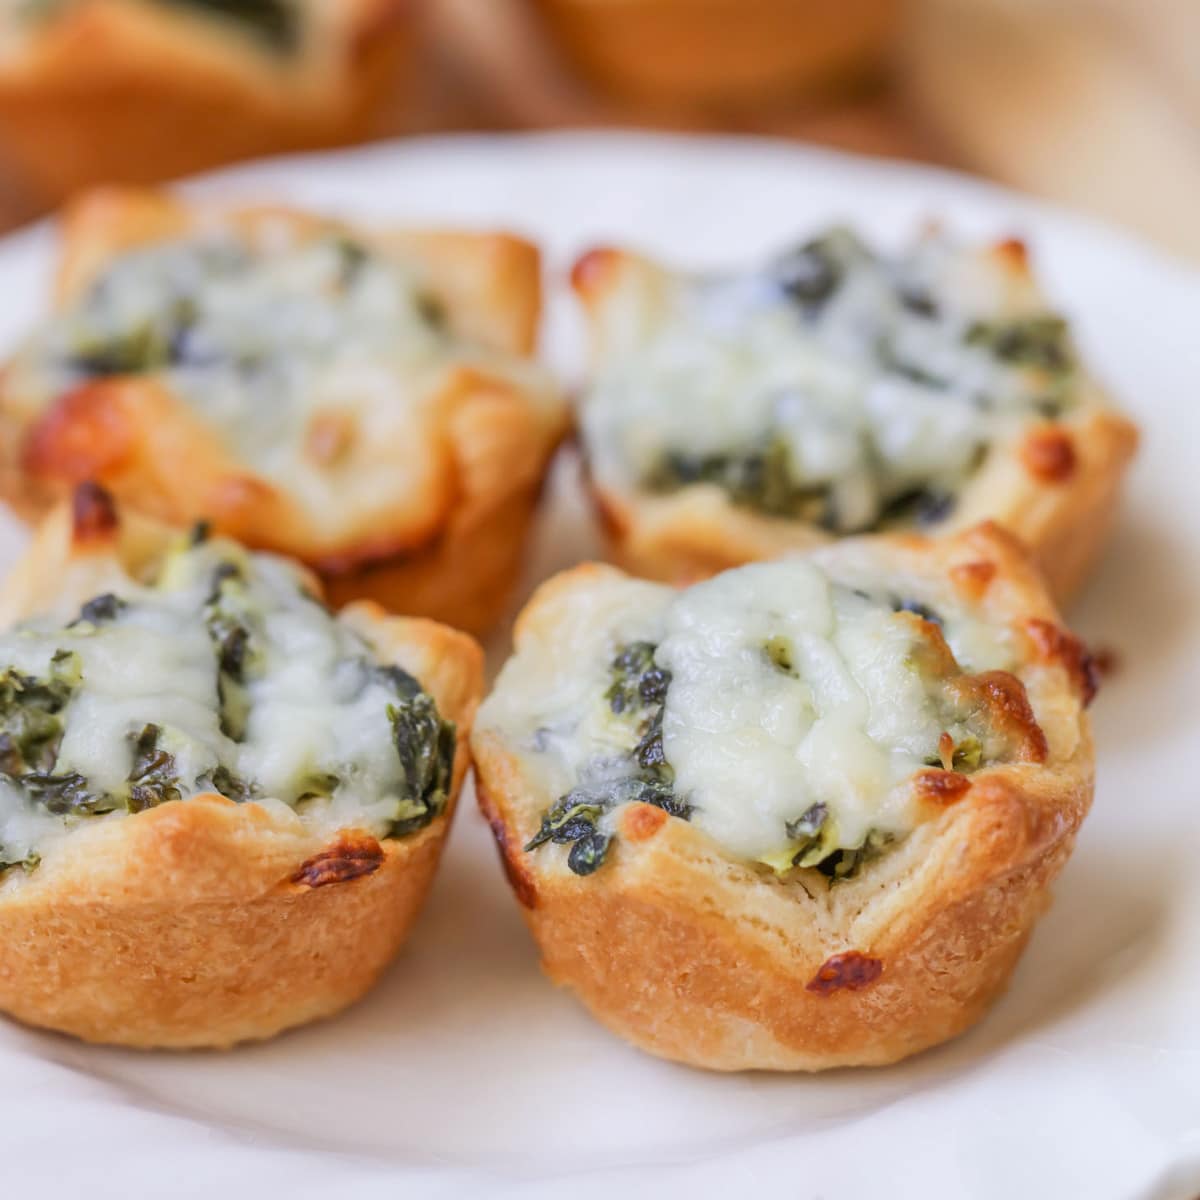 New Year's Eve Appetizers - close up of spinach bites served on a plate.